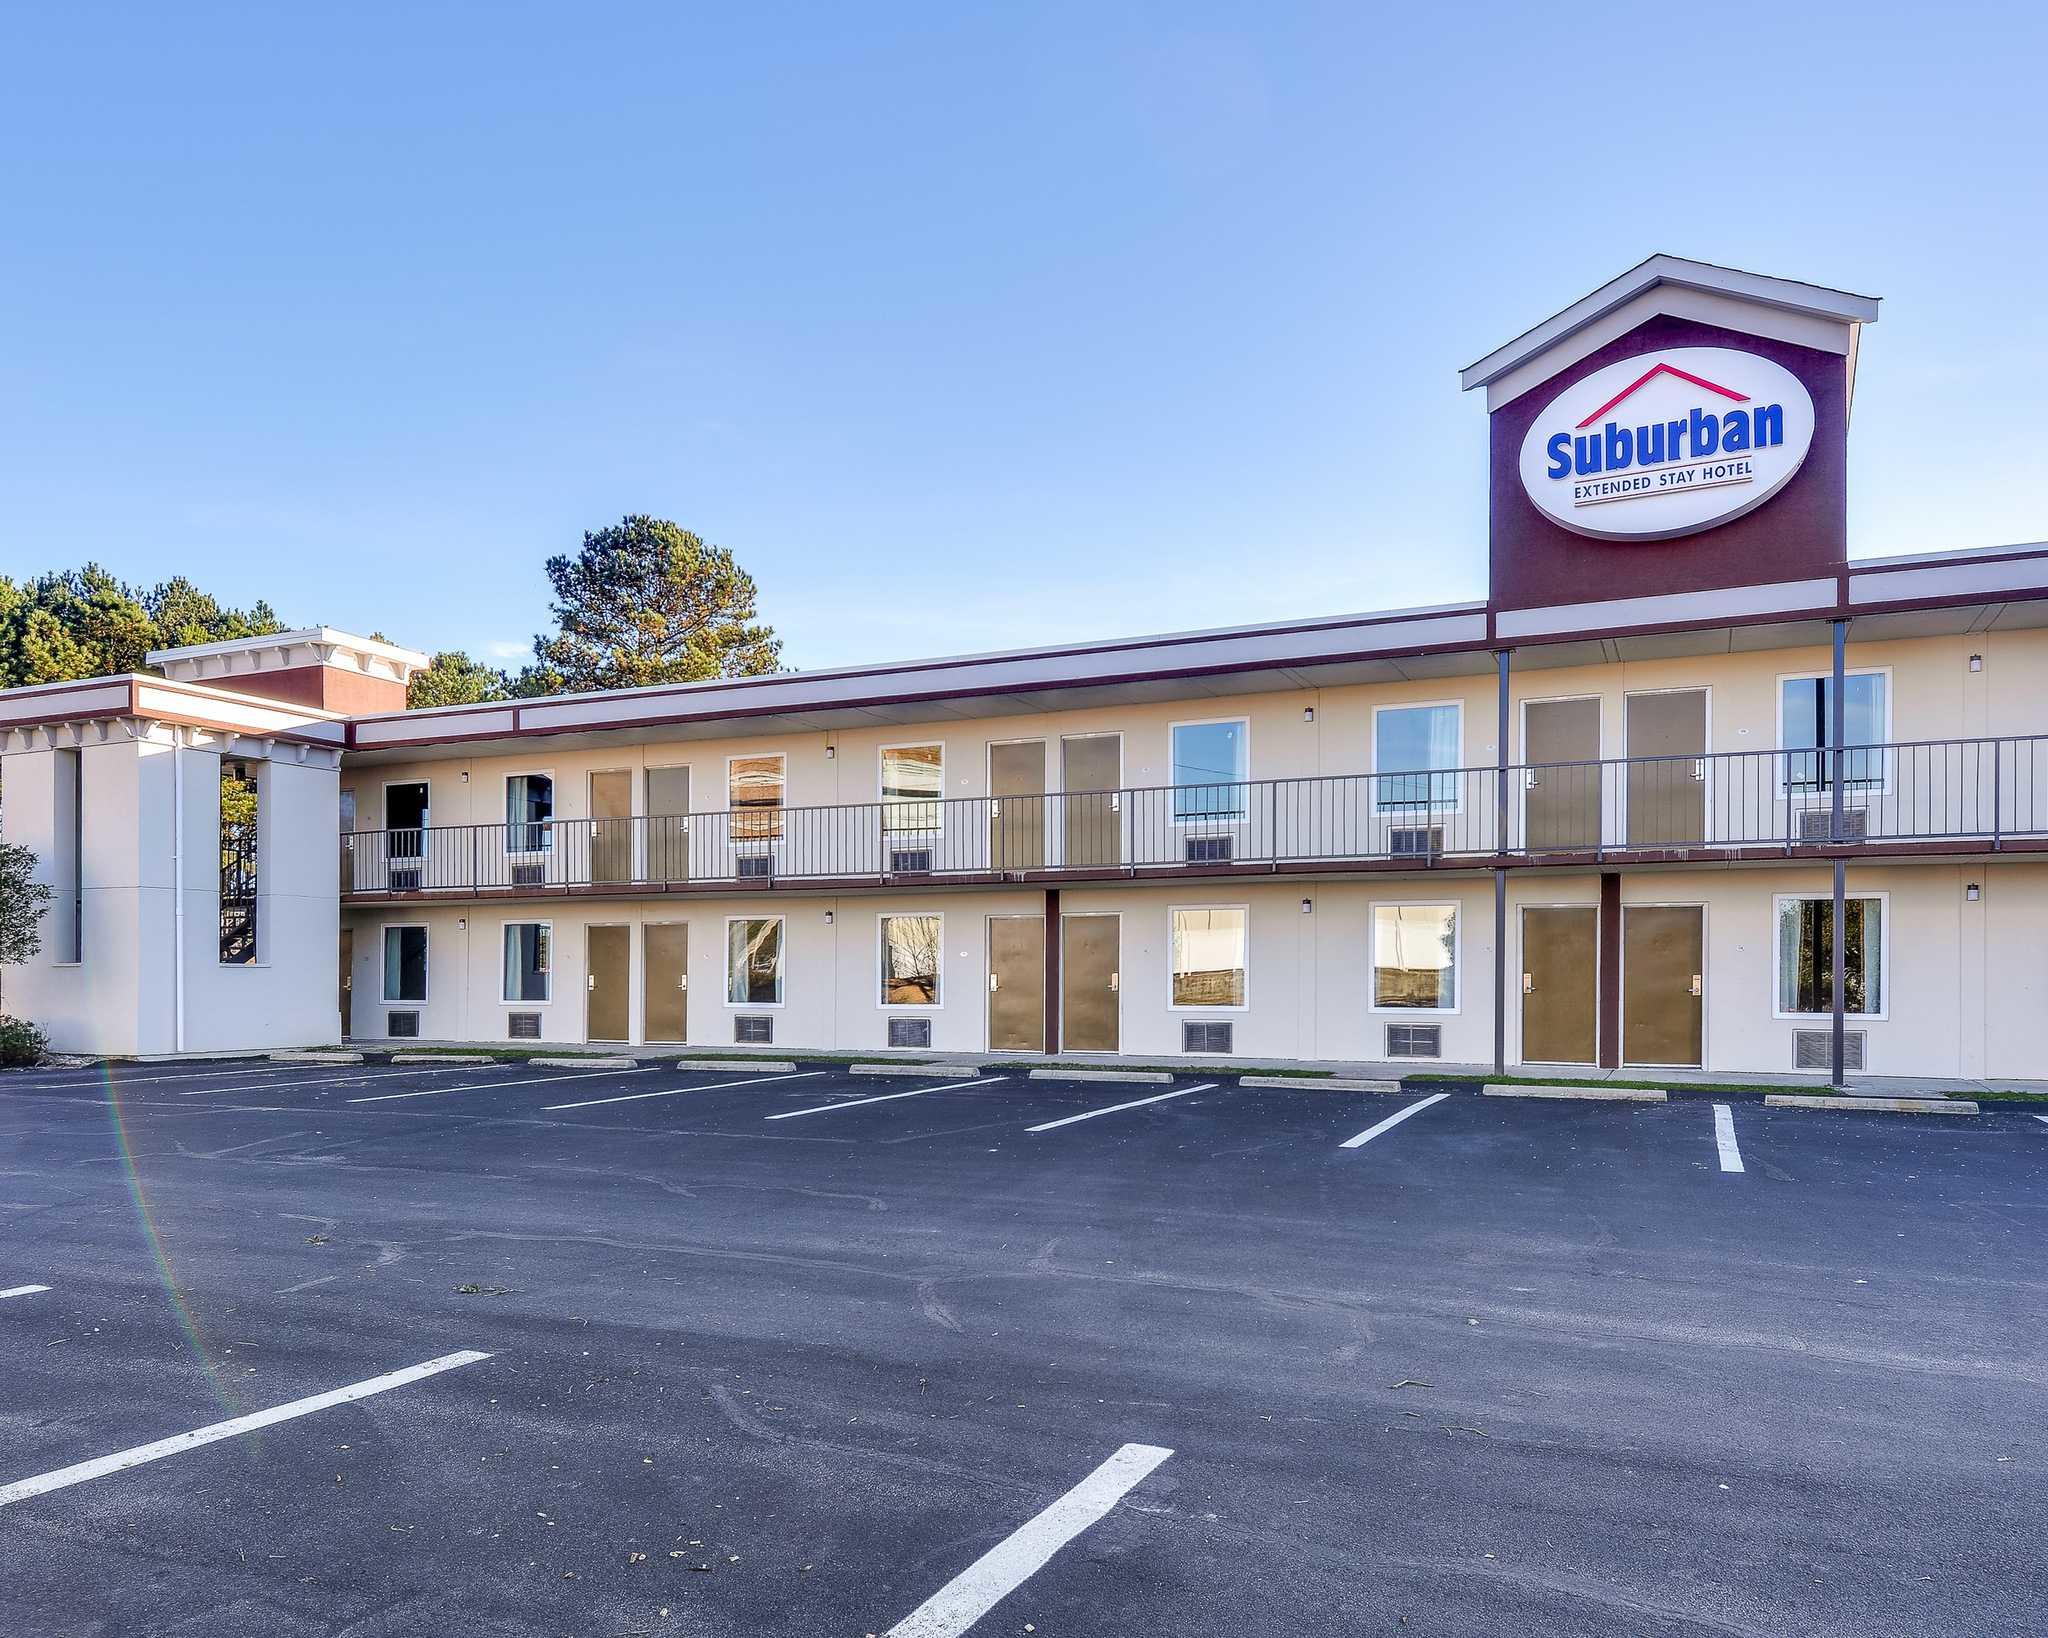 Suburban Extended Stay Hotel Coupons near me in Selma | 8coupons